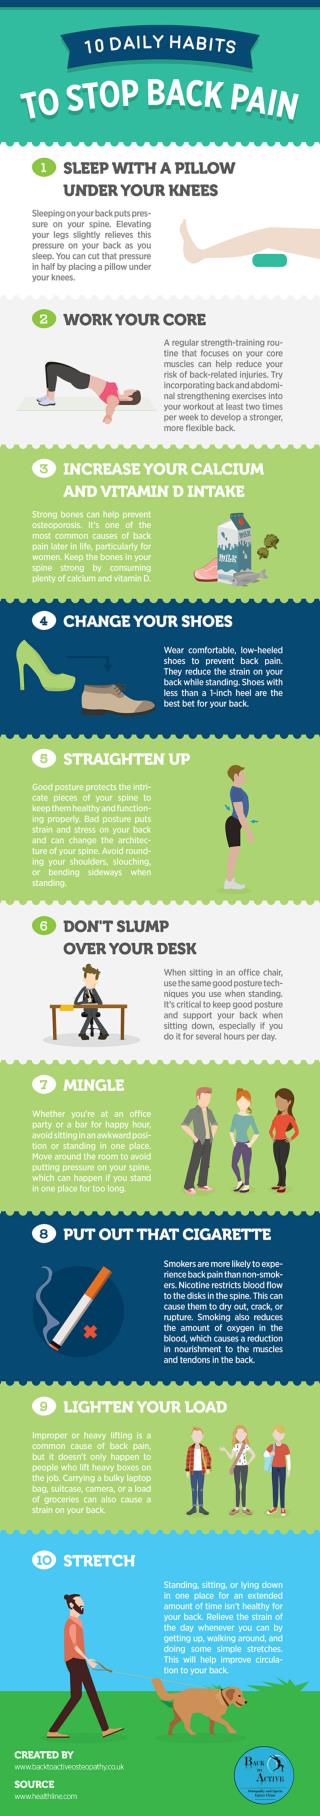 10 Daily Habits to Stop Back Pain